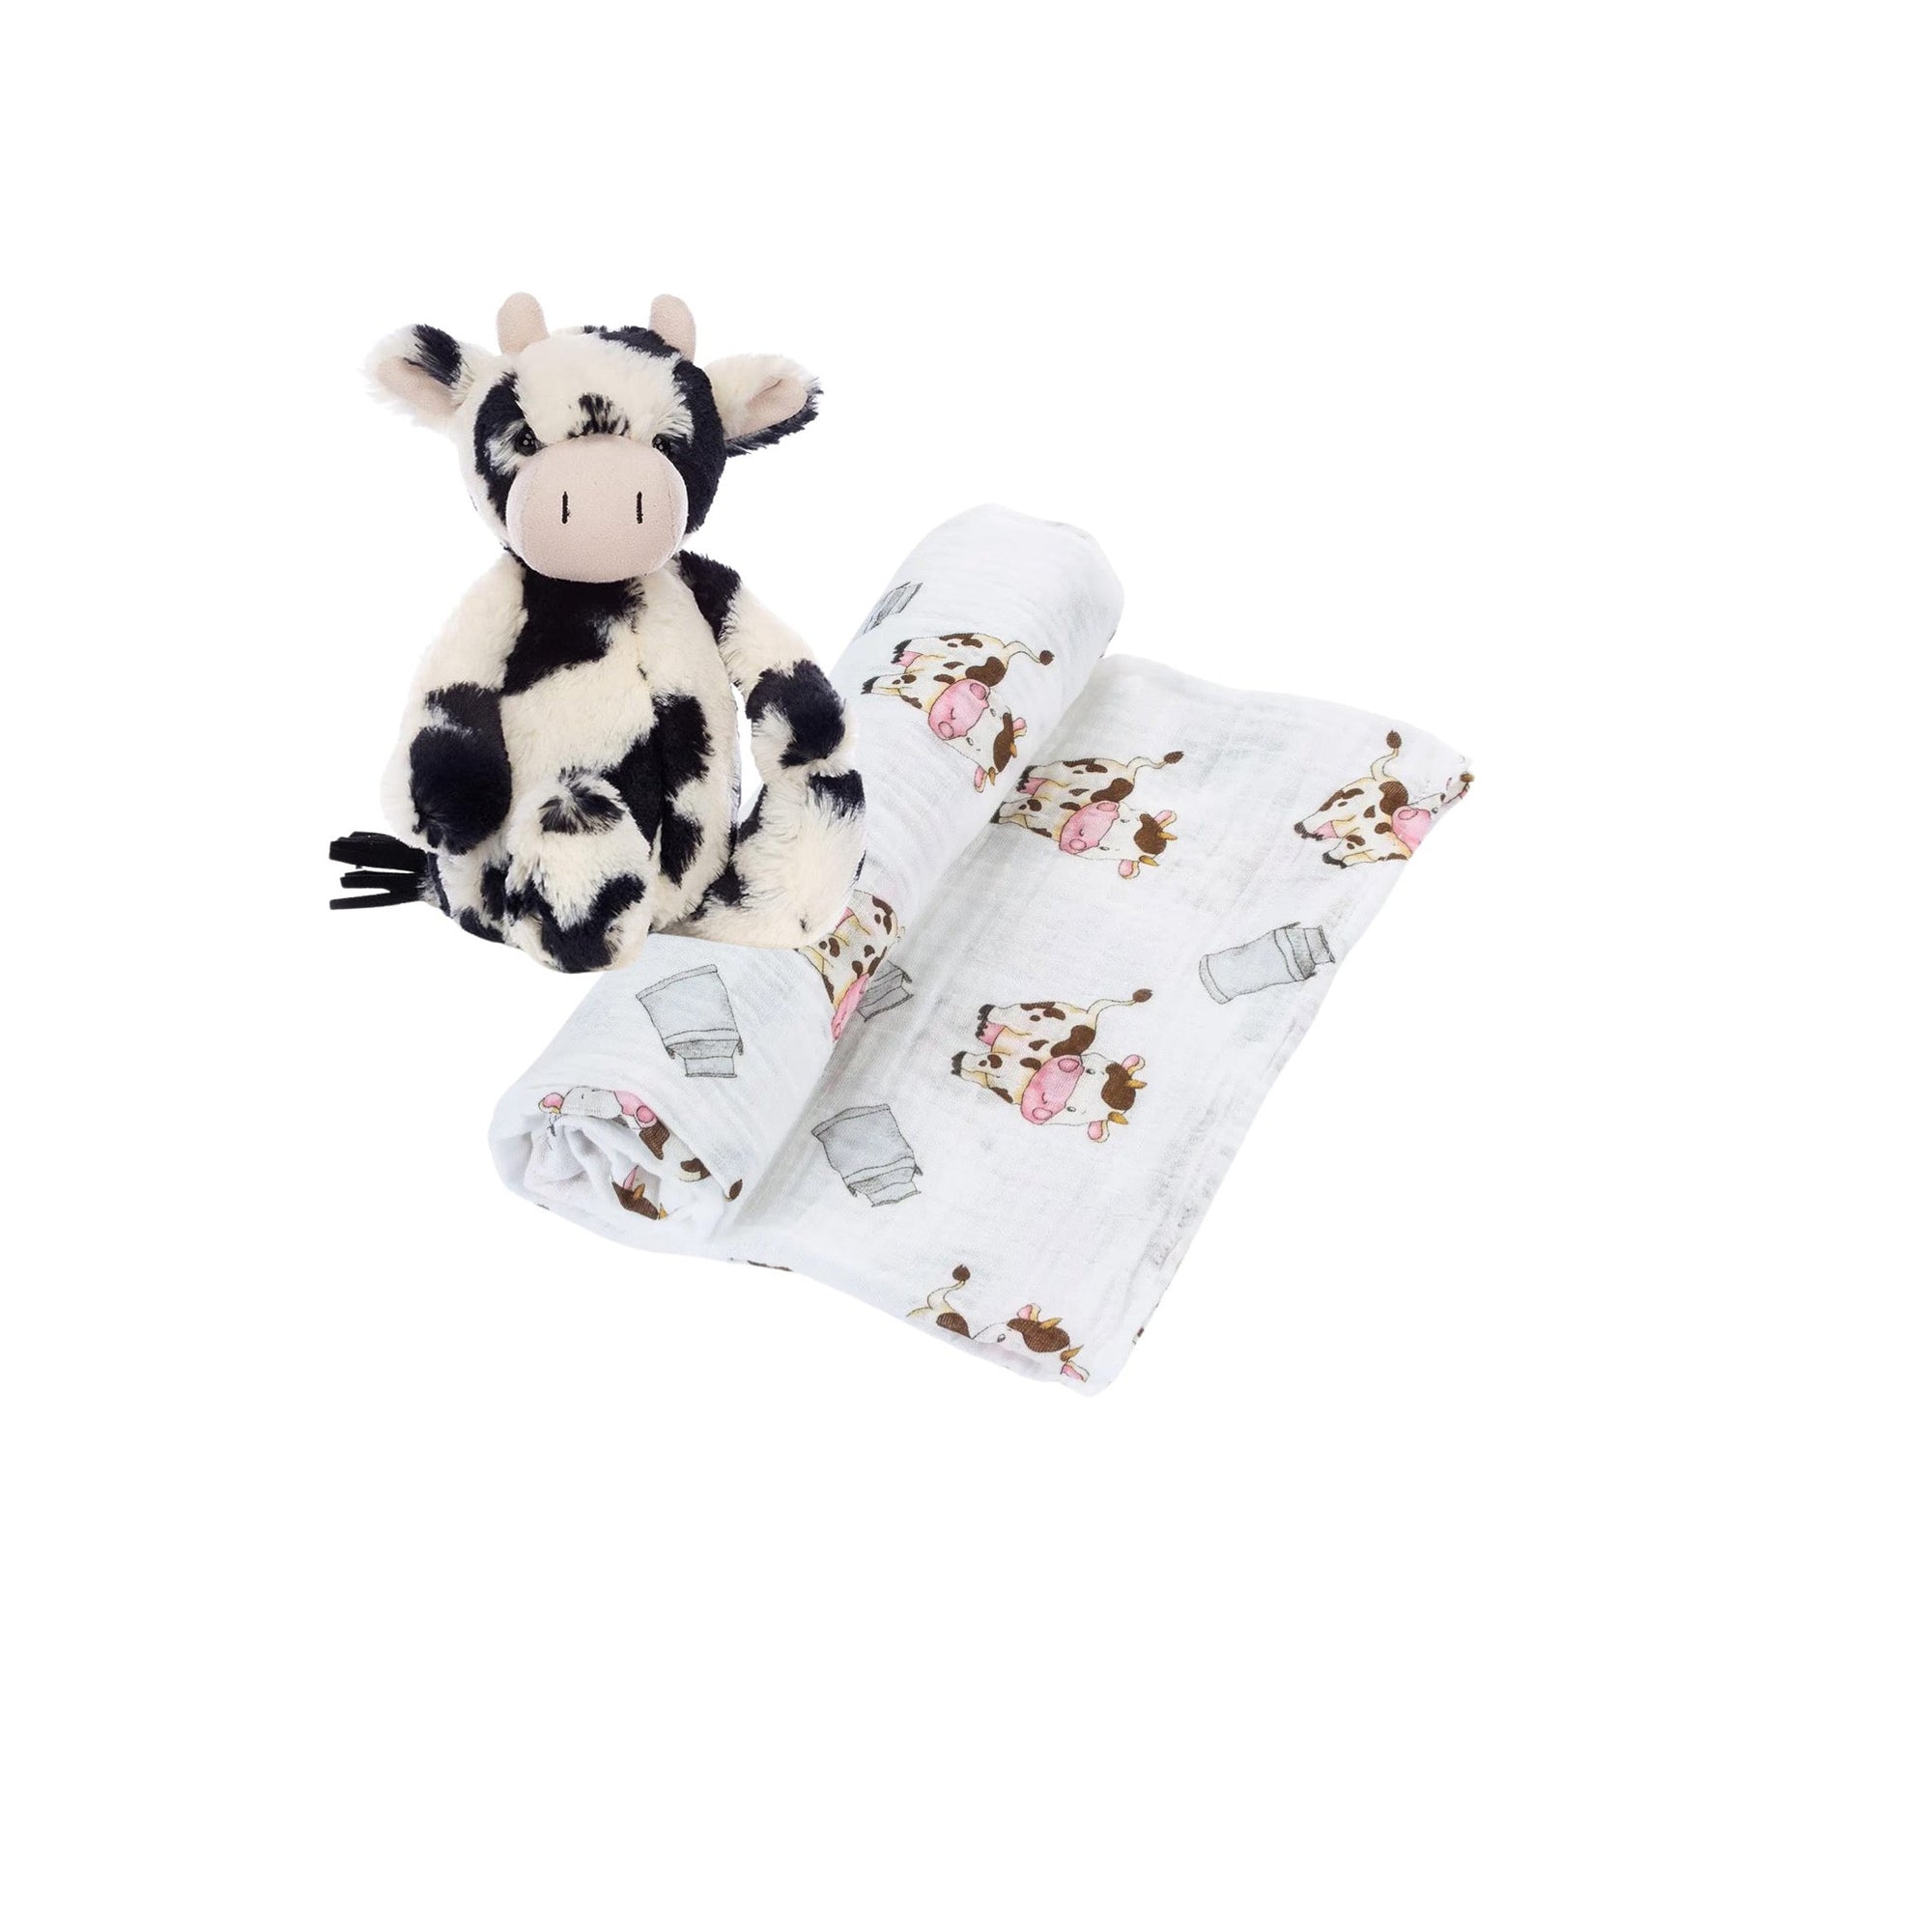 The Cow Goes Moo Swaddle